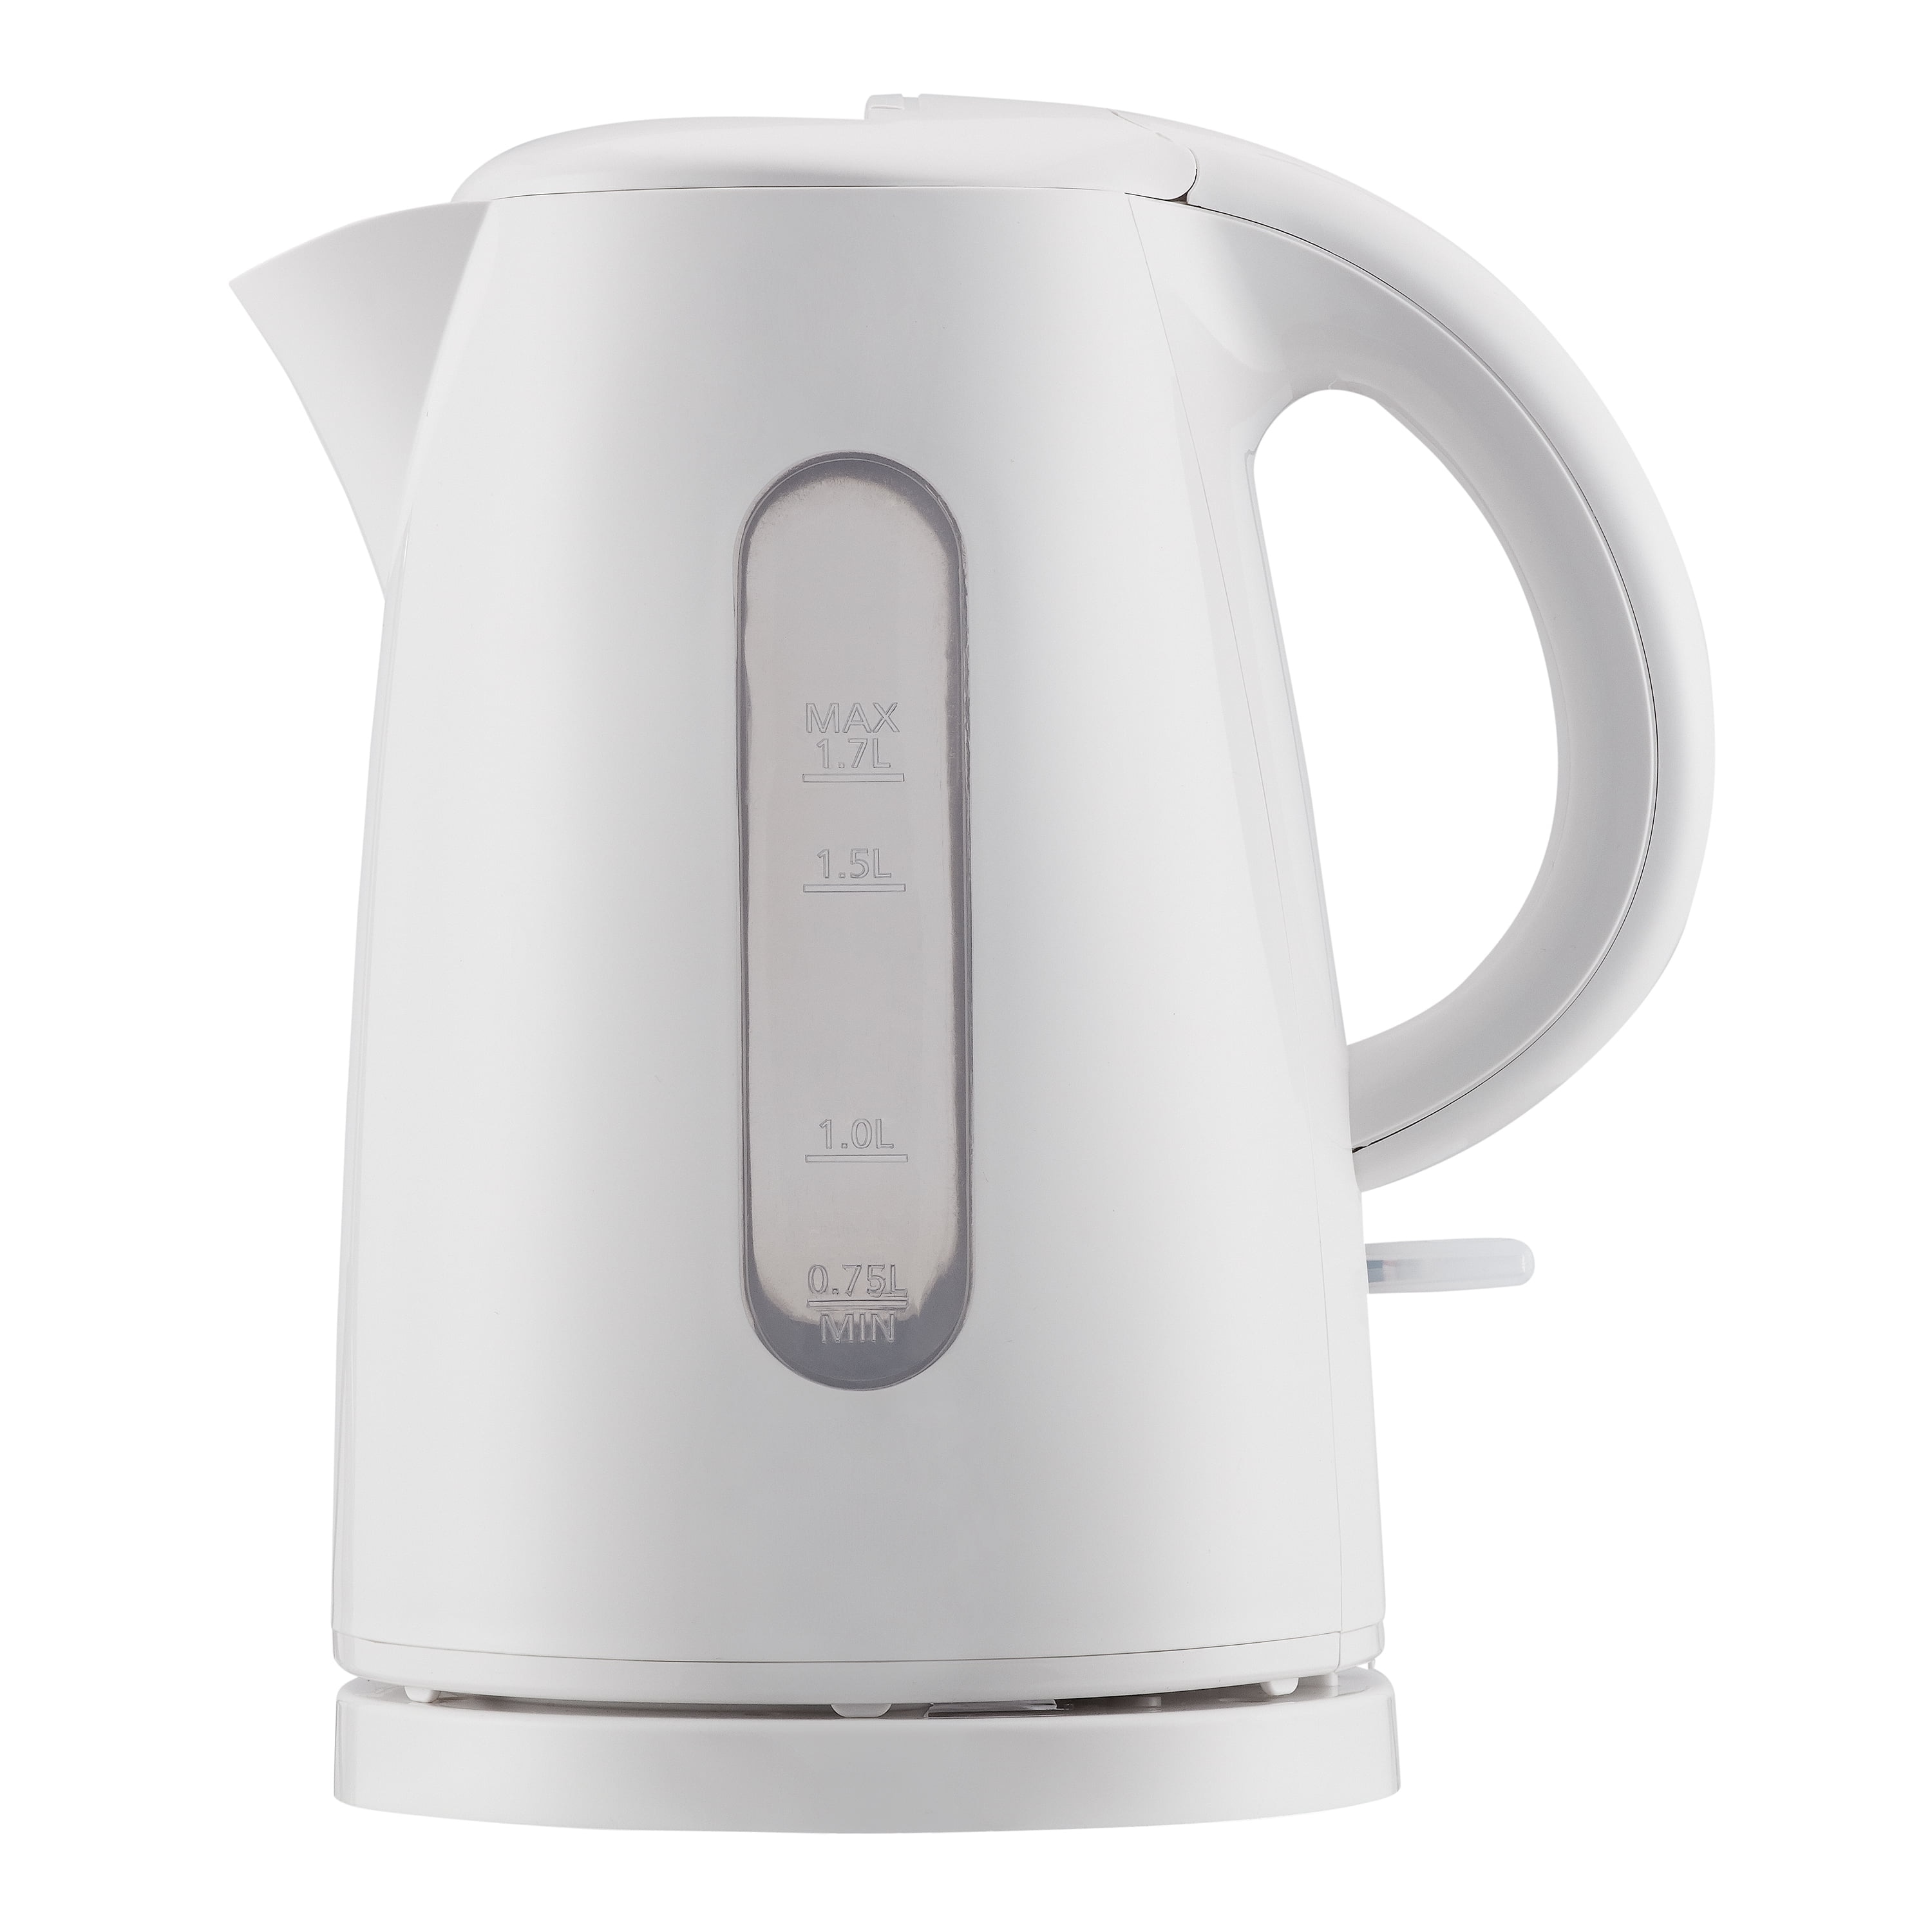 https://ak1.ostkcdn.com/images/products/is/images/direct/19e24ffd59ef4138a7da1e987eb2cb0068367461/1.7-Liter-Plastic-Electric-Kettle%2C-White.jpg